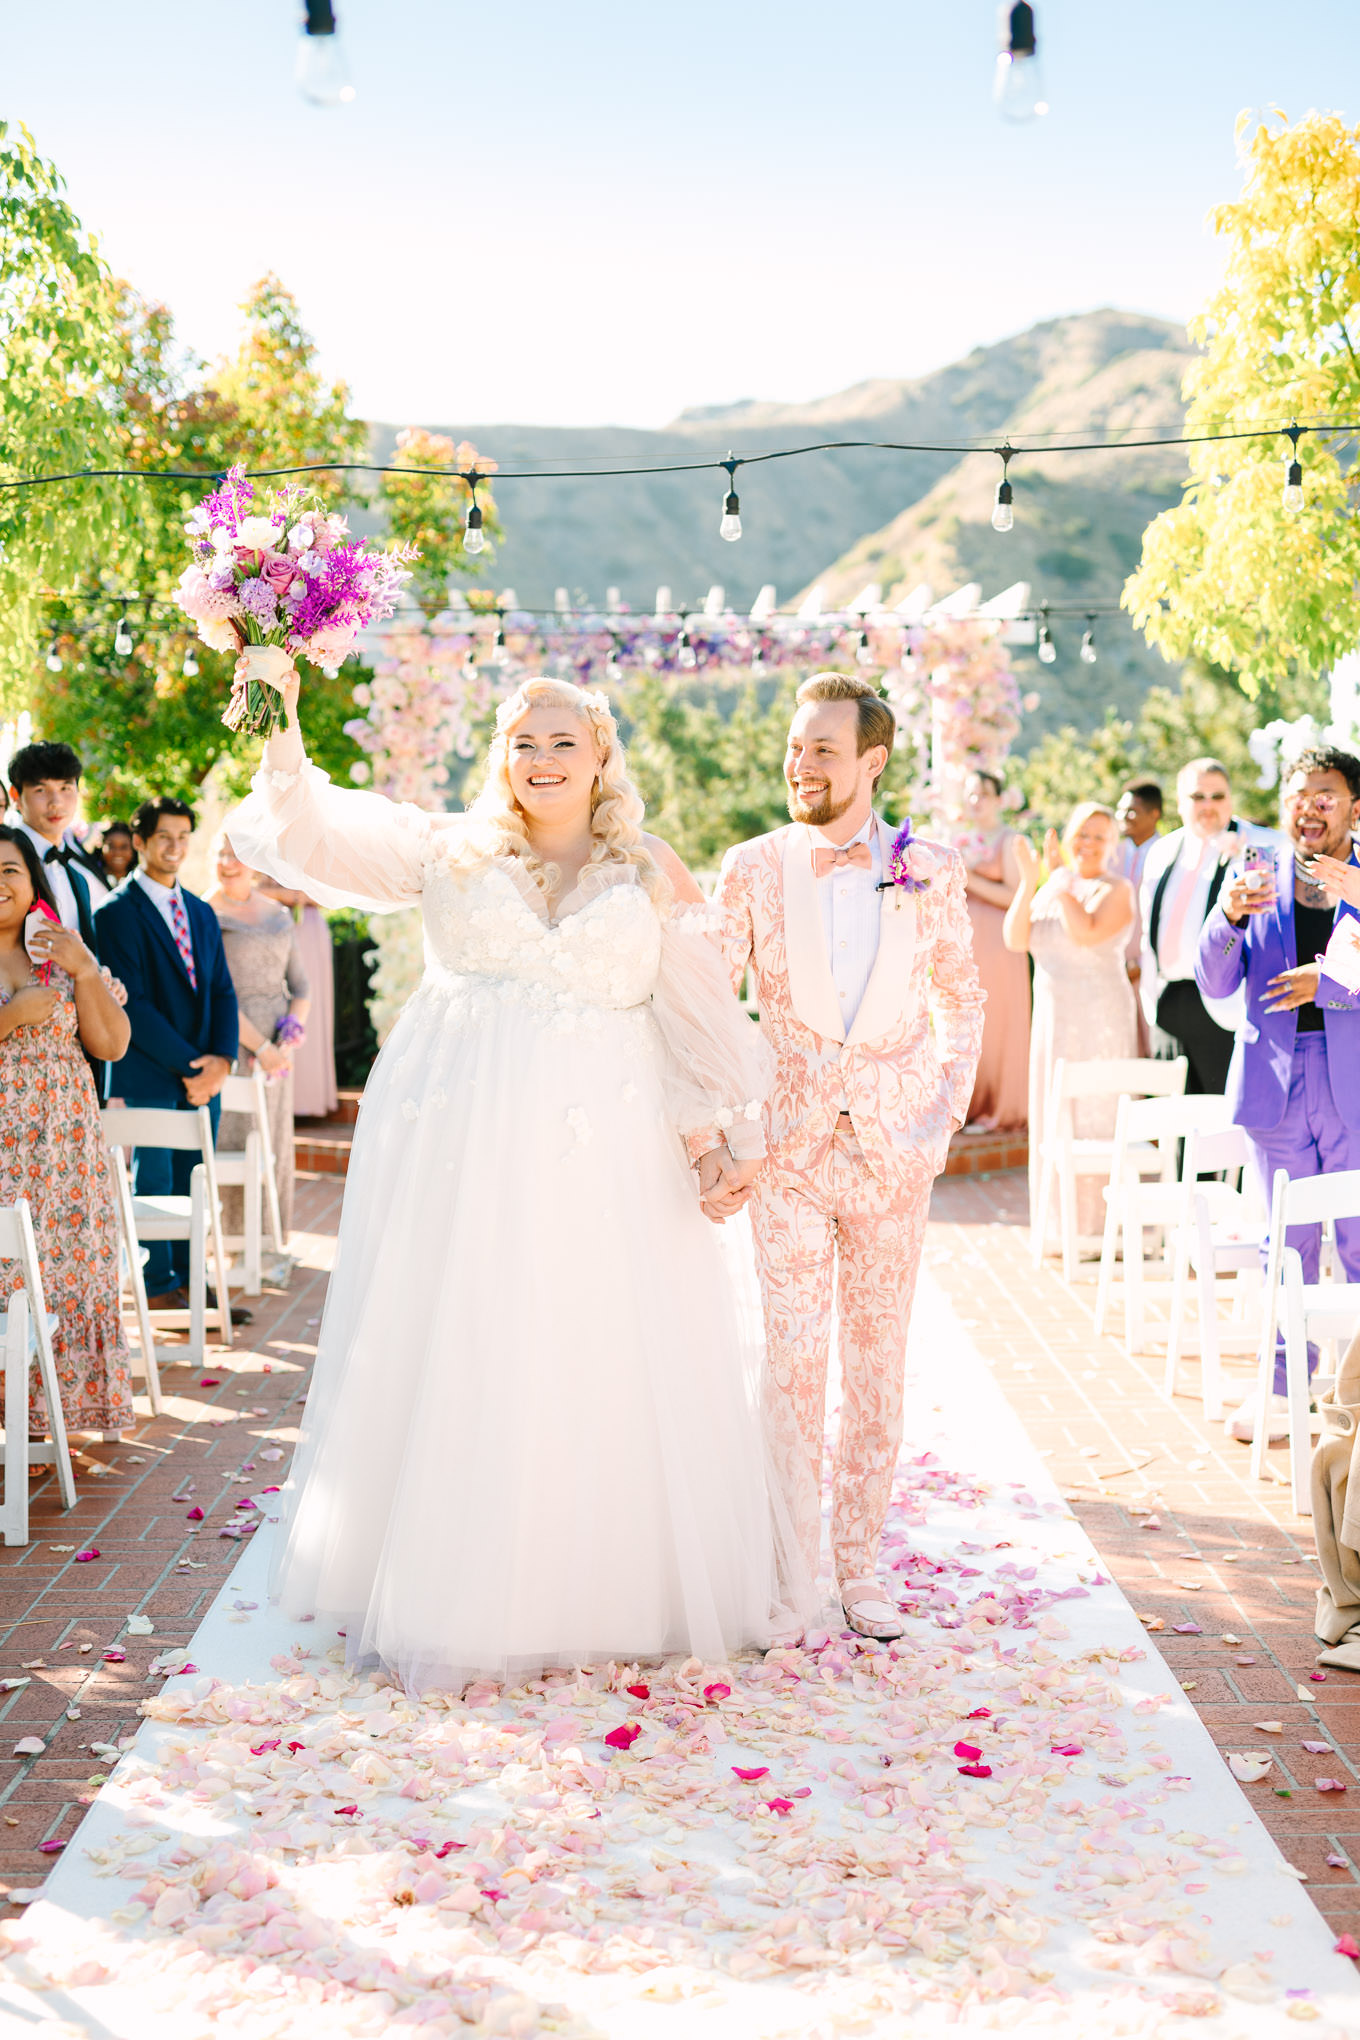 Heather Traska's wedding at Castaway Burbank | Wedding and elopement photography roundup | Los Angeles and Palm Springs photographer | #losangeleswedding #palmspringswedding #elopementphotographer Source: Mary Costa Photography | Los Angeles